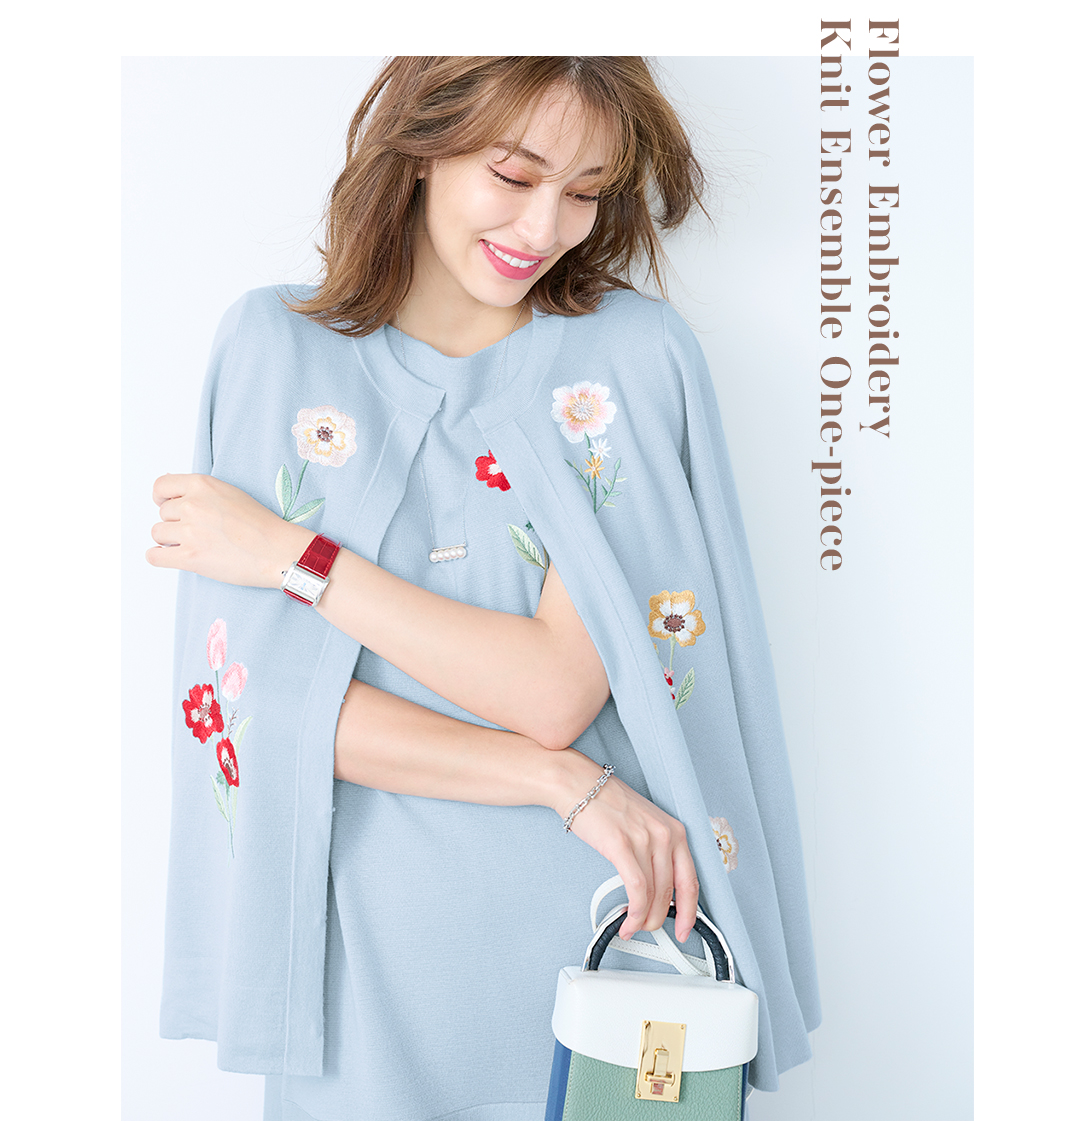 Flower Embroidery
Knit Ensemble One-piece